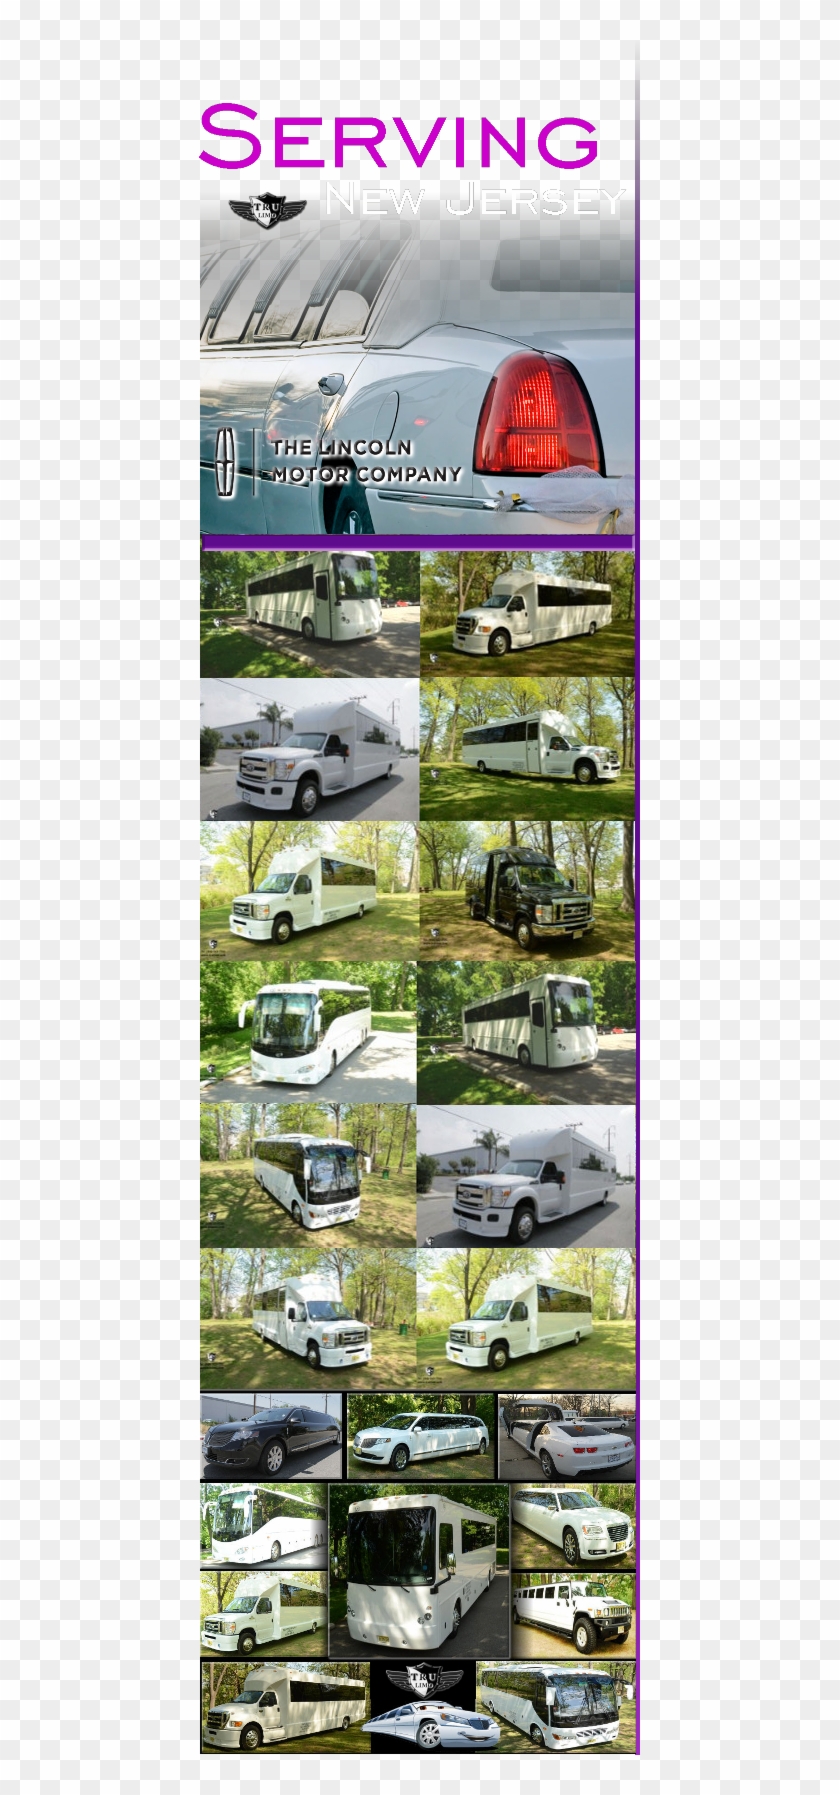 Nj Townships Party Bus Limos Party Bus Nj Limo Service - Gmc Motorhome Clipart